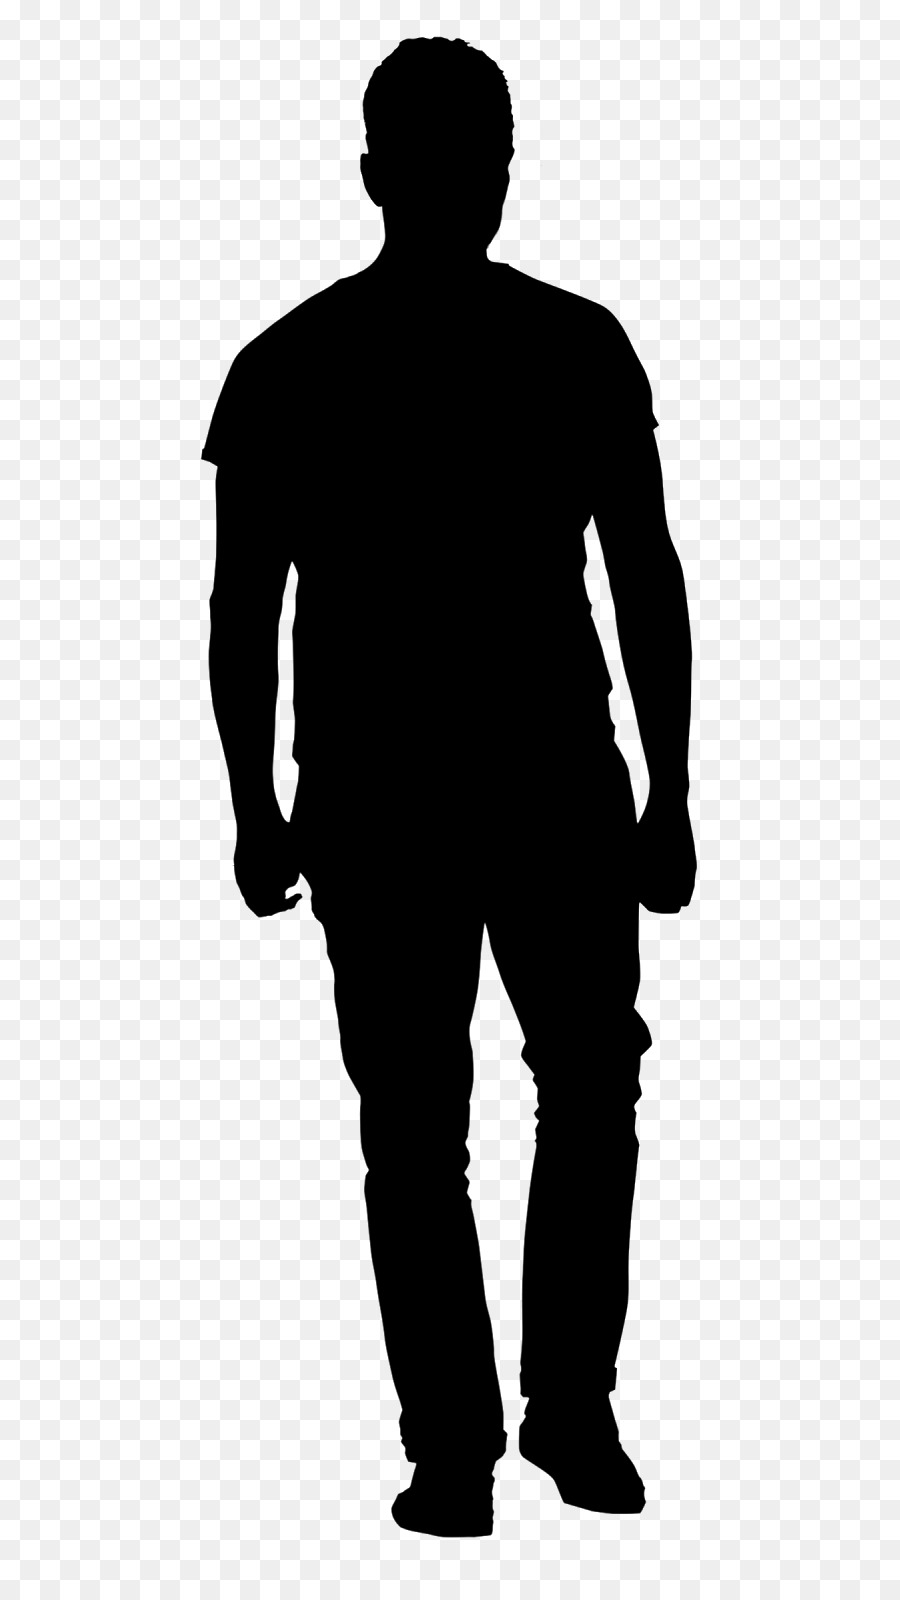 Free Silhouette Man Png, Download Free Silhouette Man Png png images ...